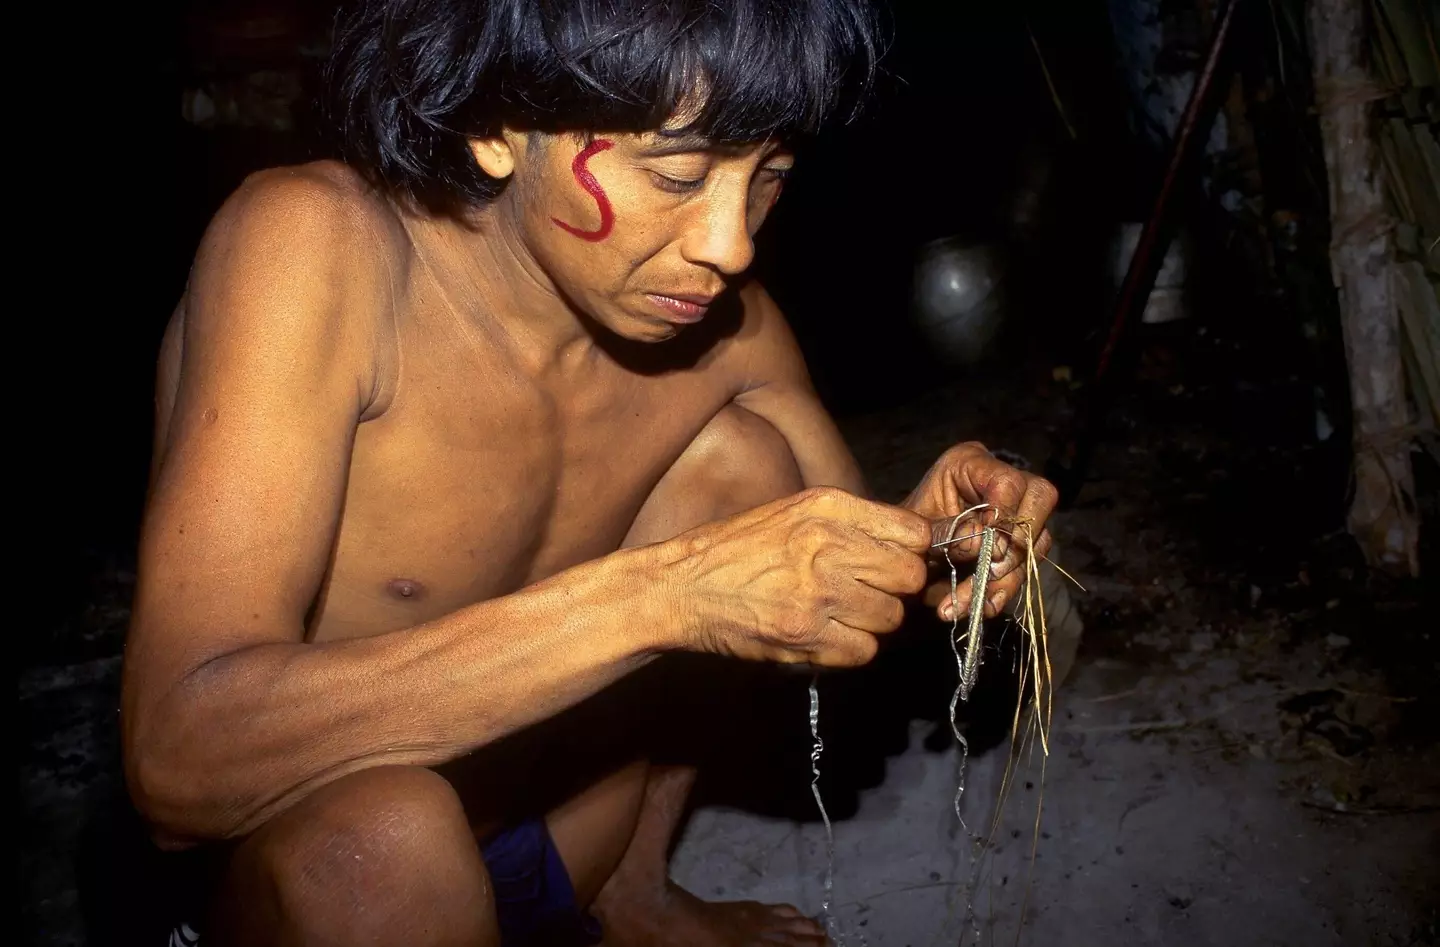 Man of the Yanomami tribe sewing.